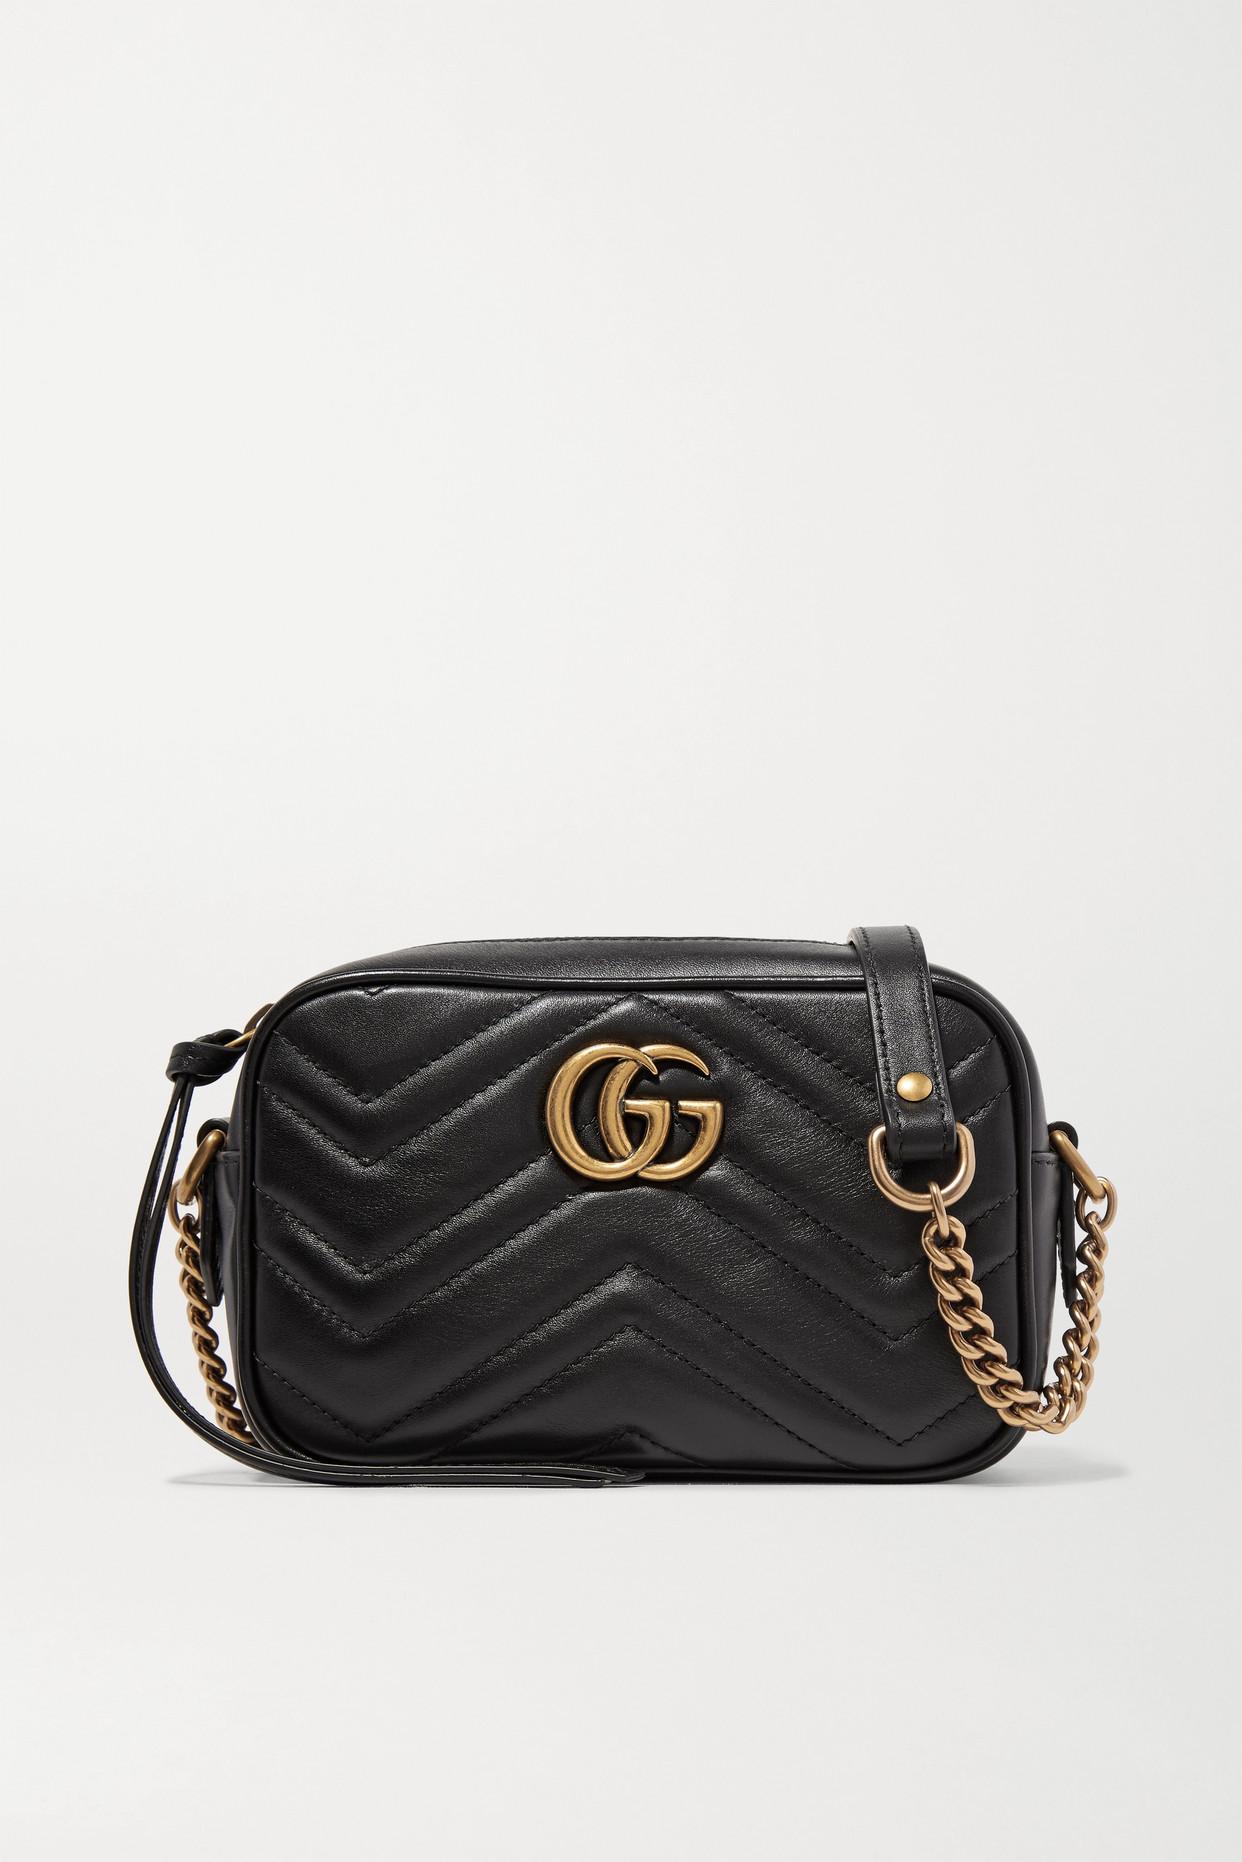 Gucci Gg Marmont Camera Mini Quilted Leather Shoulder Bag in Black | Lyst